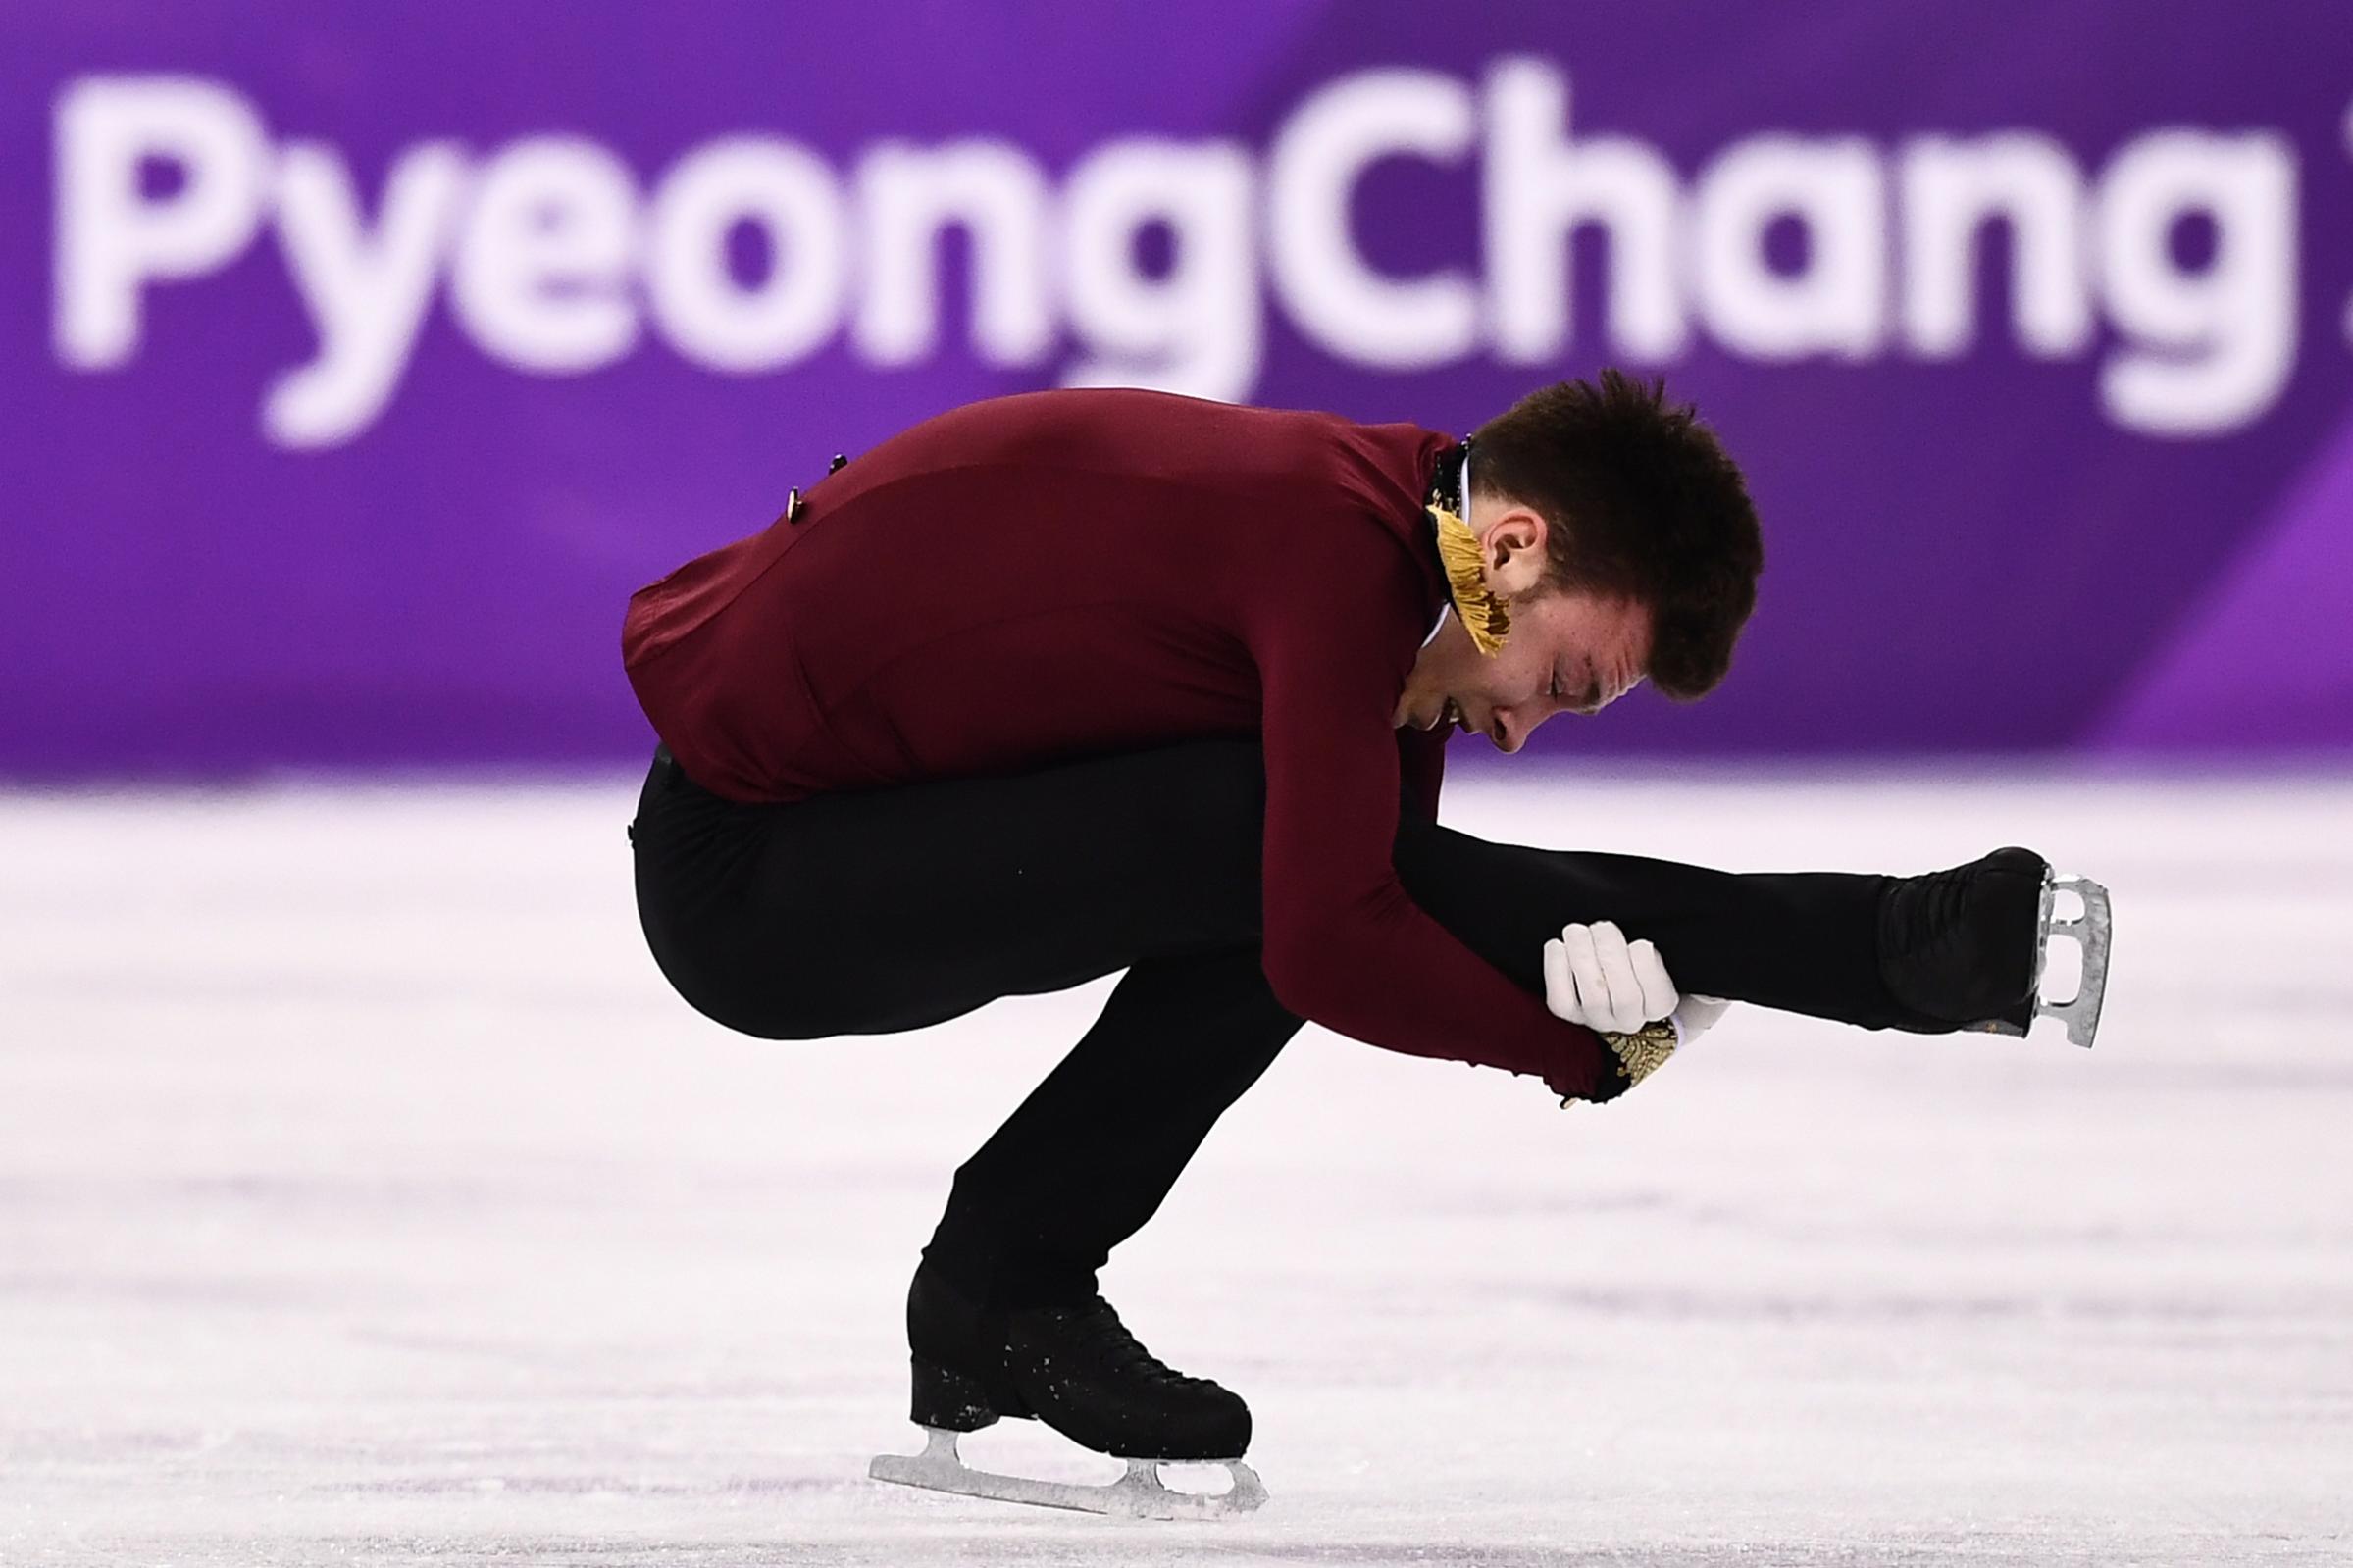 Russia's Dmitri Aliev competes in the Men's Single Skating Short Program at the Gangneung Ice Arena in Gangneung on Feb. 16, 2018.